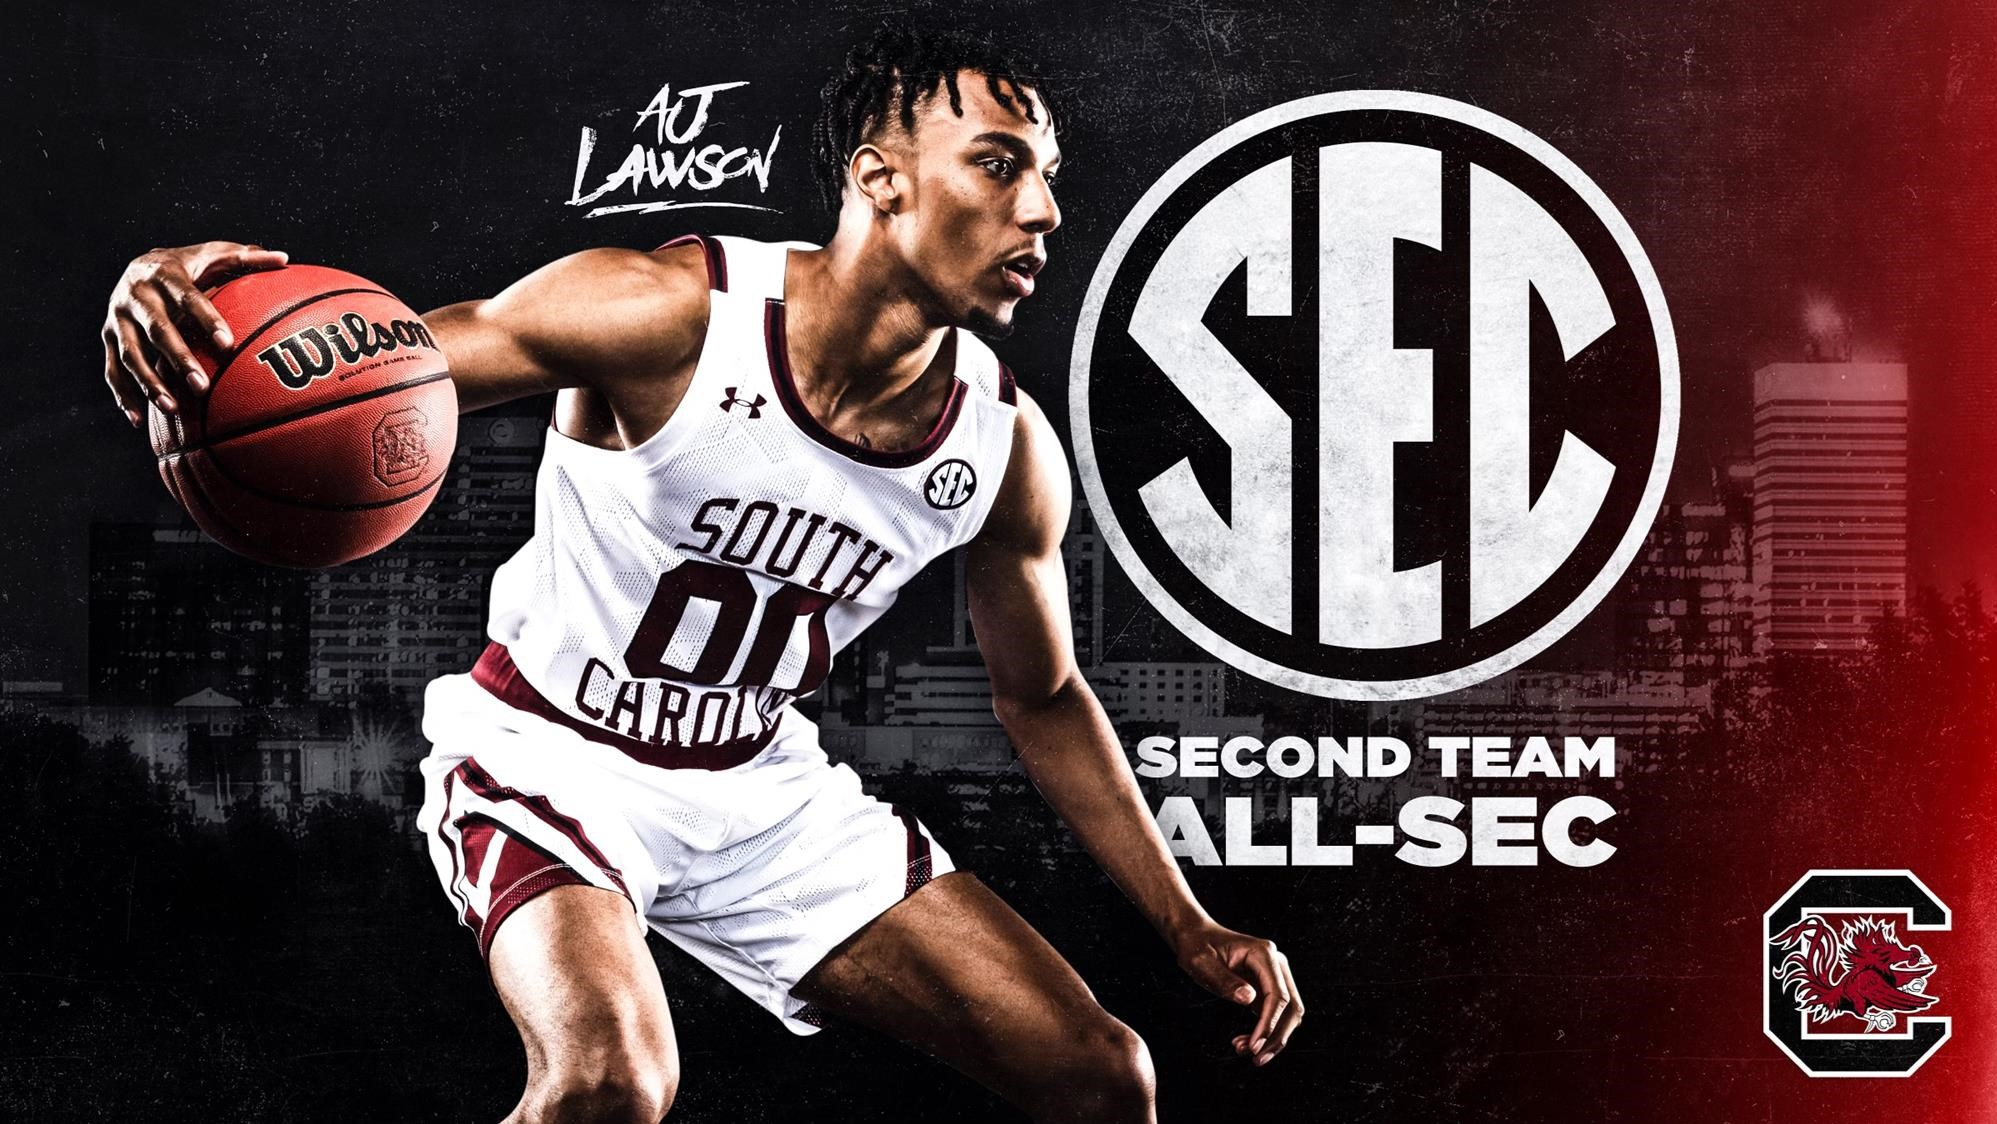 Lawson Named Second Team All-SEC By League Coaches